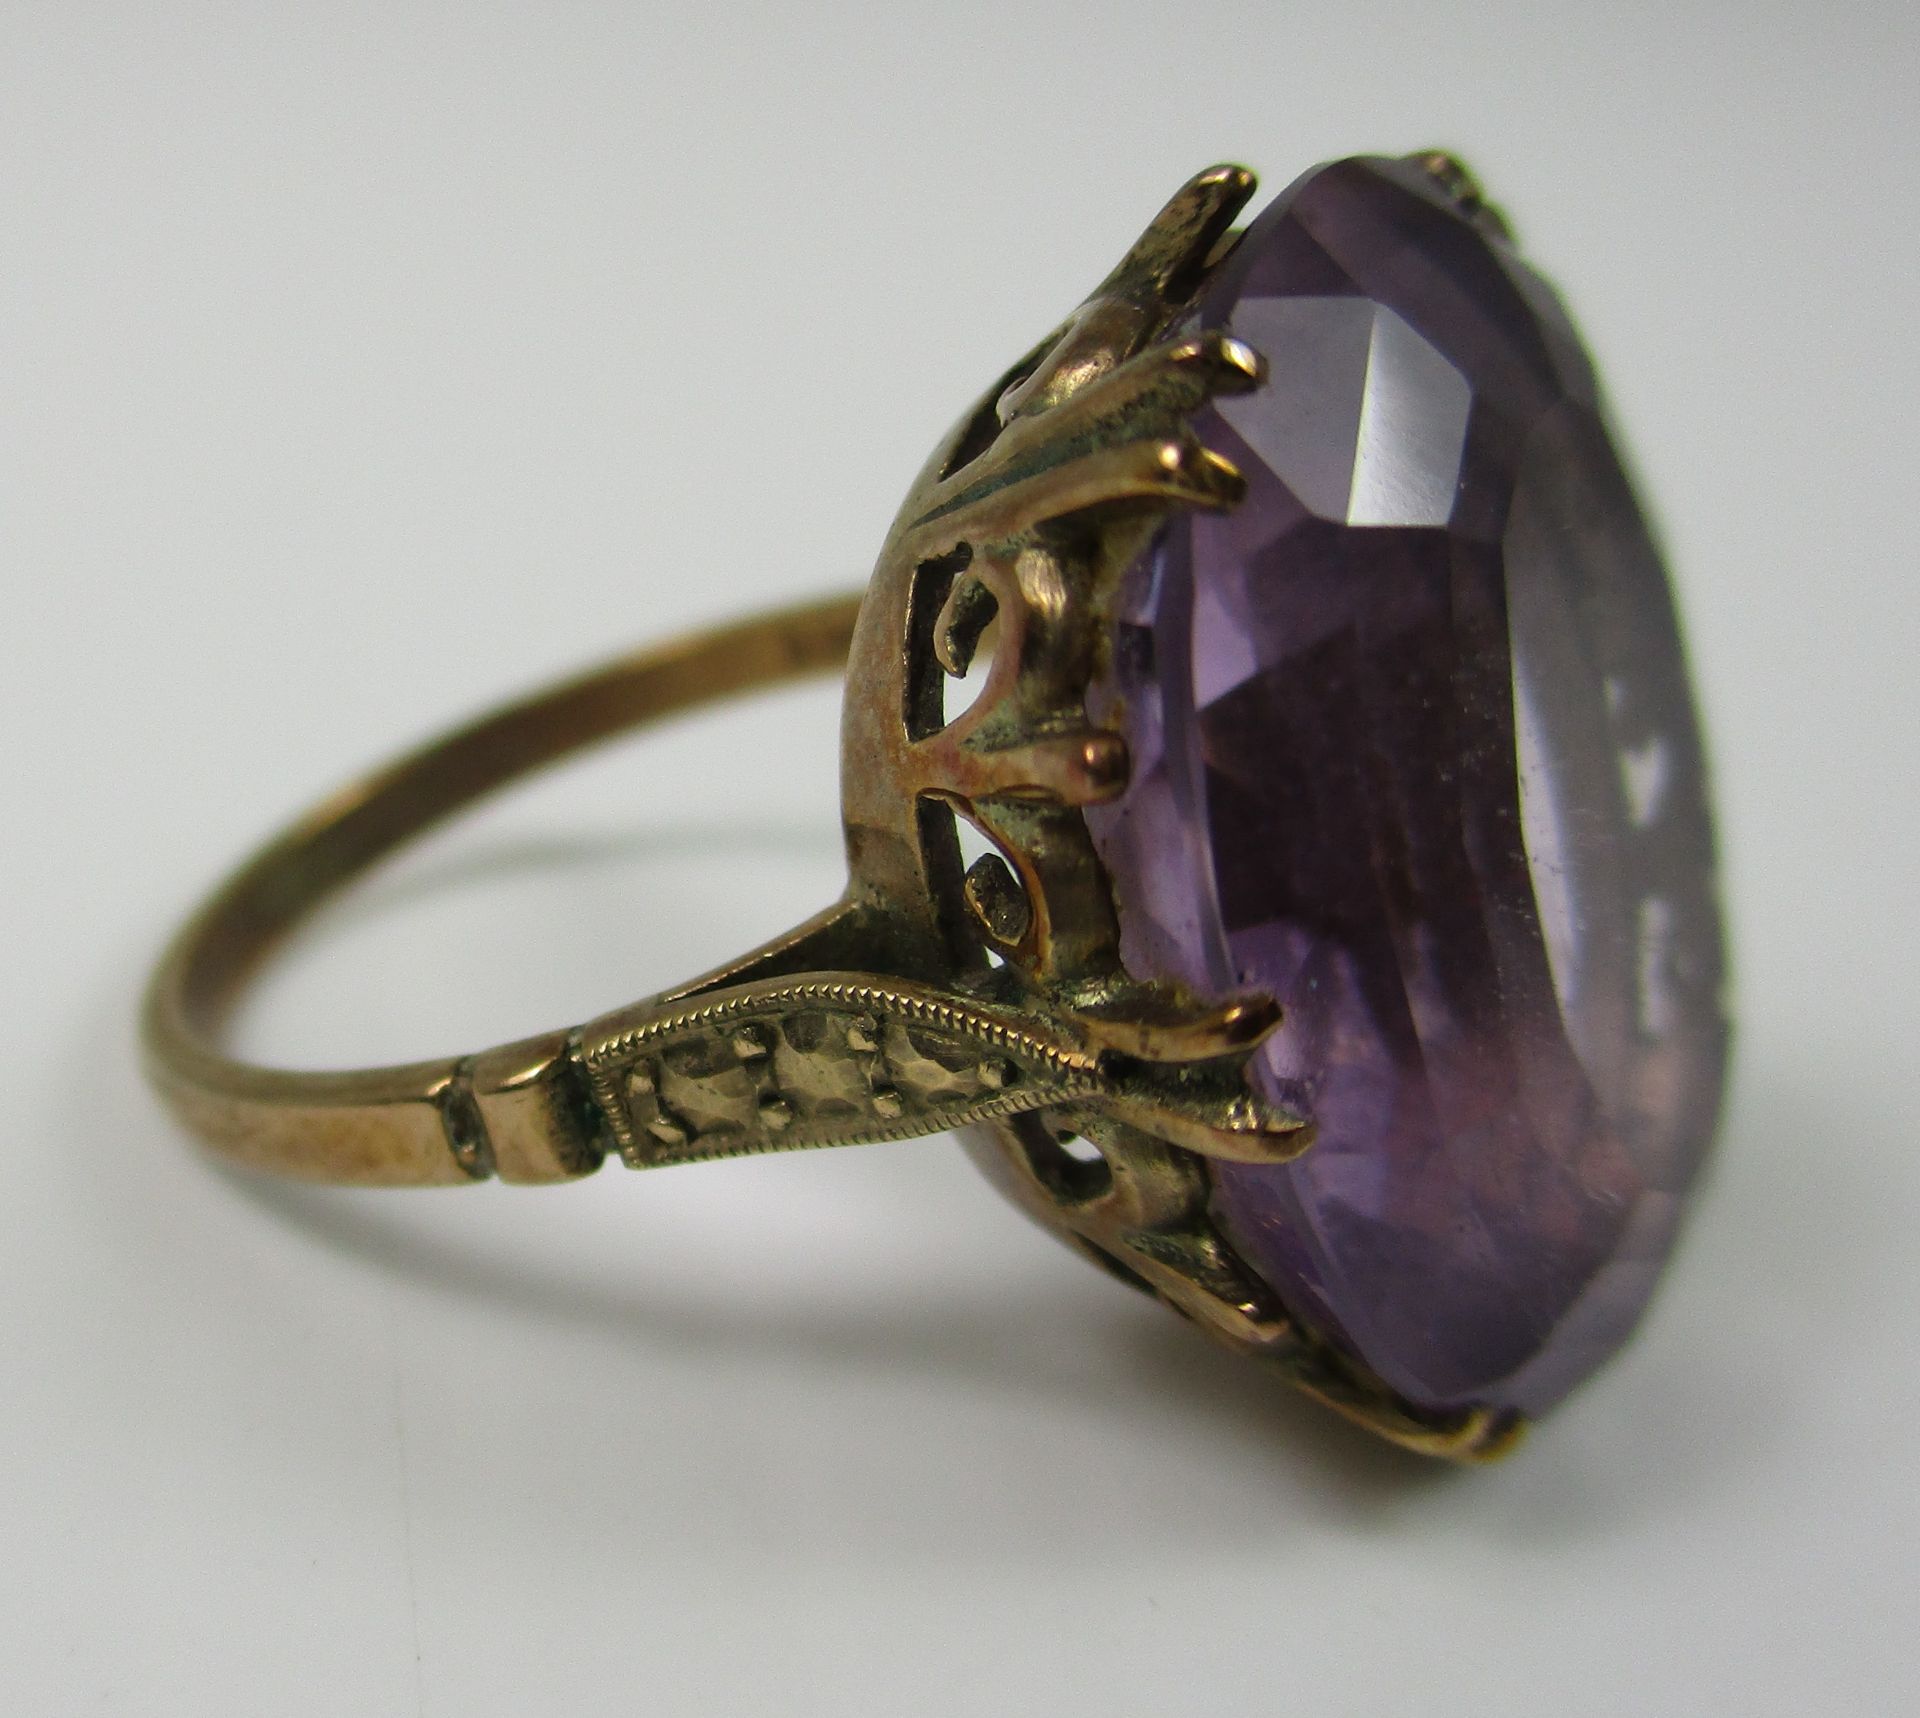 A 9ct gold single stone amethyst ring